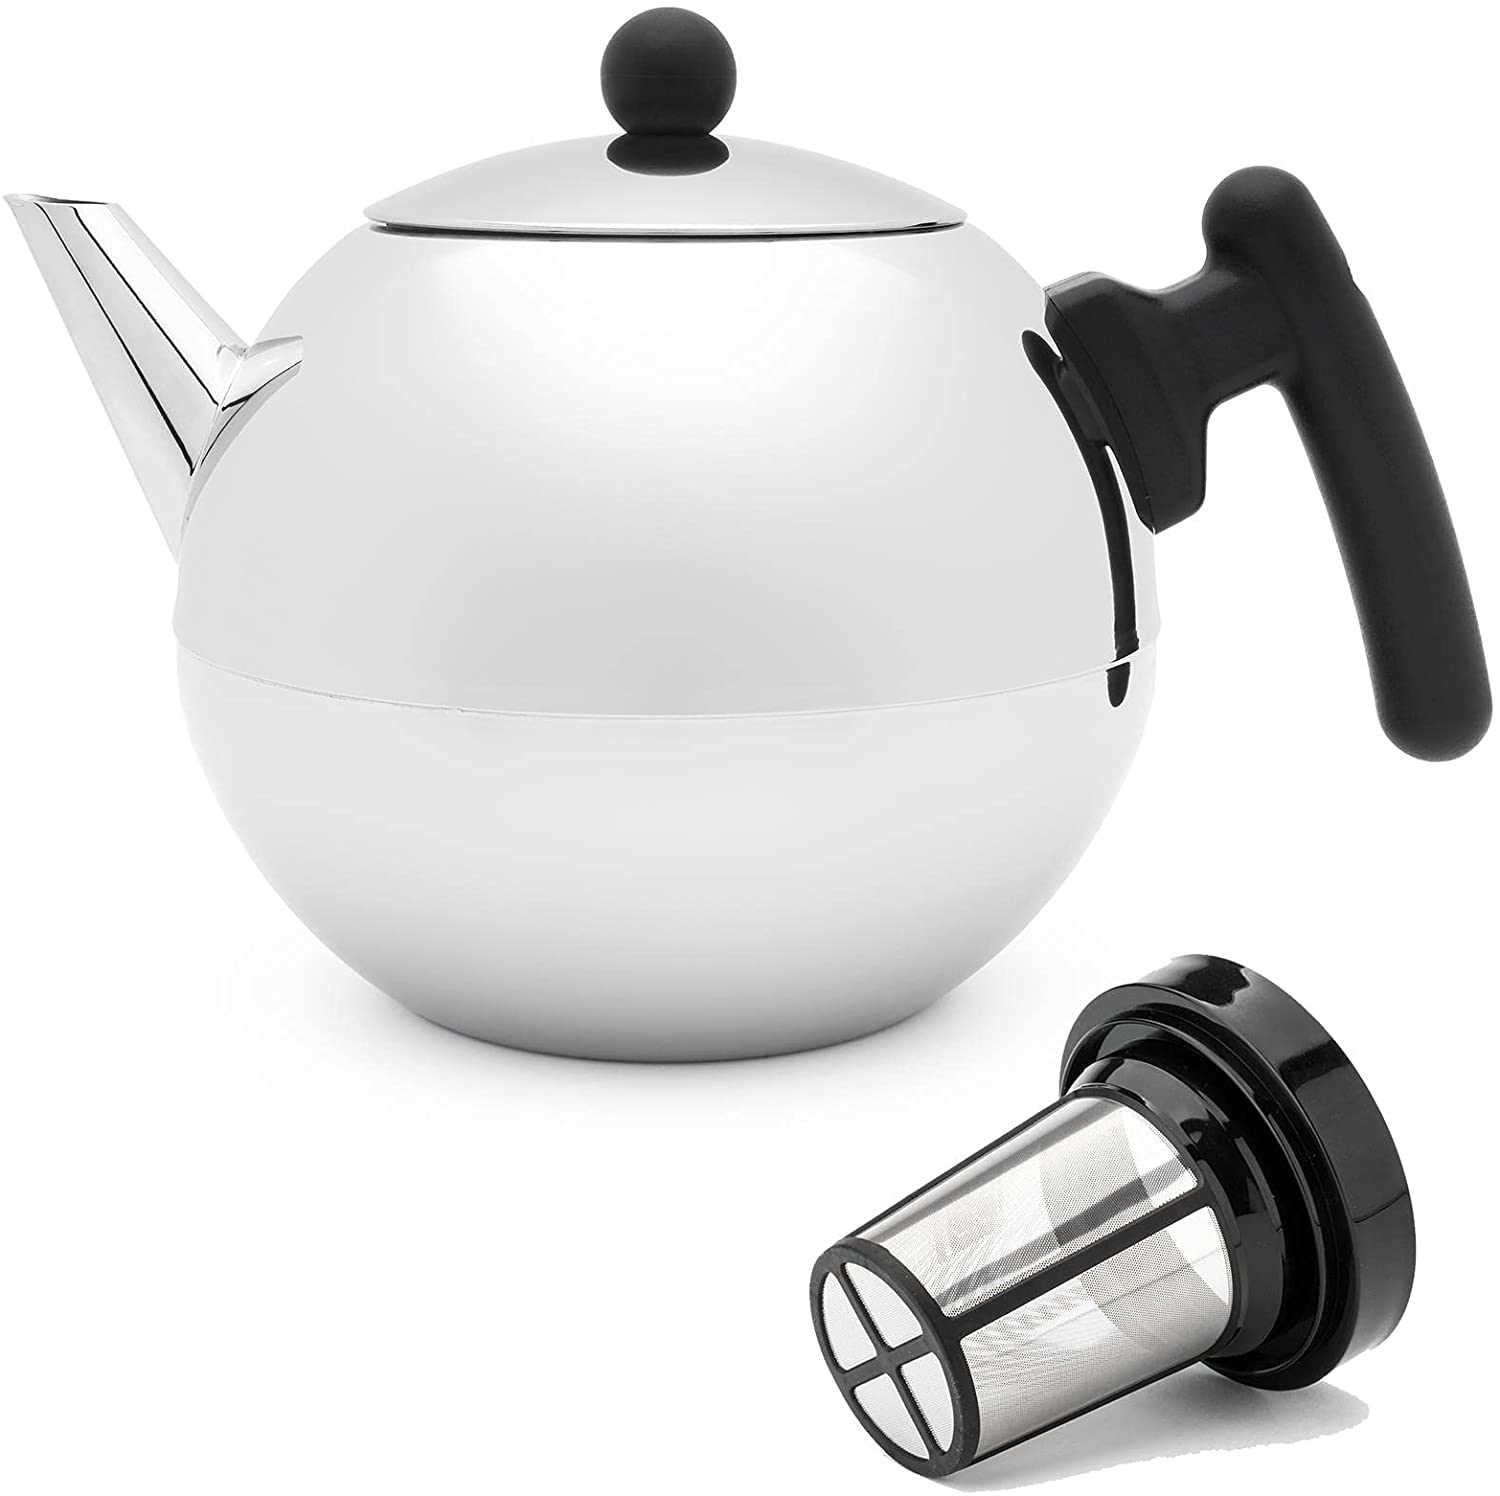 Bredemeijer Teapot Stainless Steel Set Glossy 1.2 Litre Handle Black Double-Walled with Tea Filter Strainer